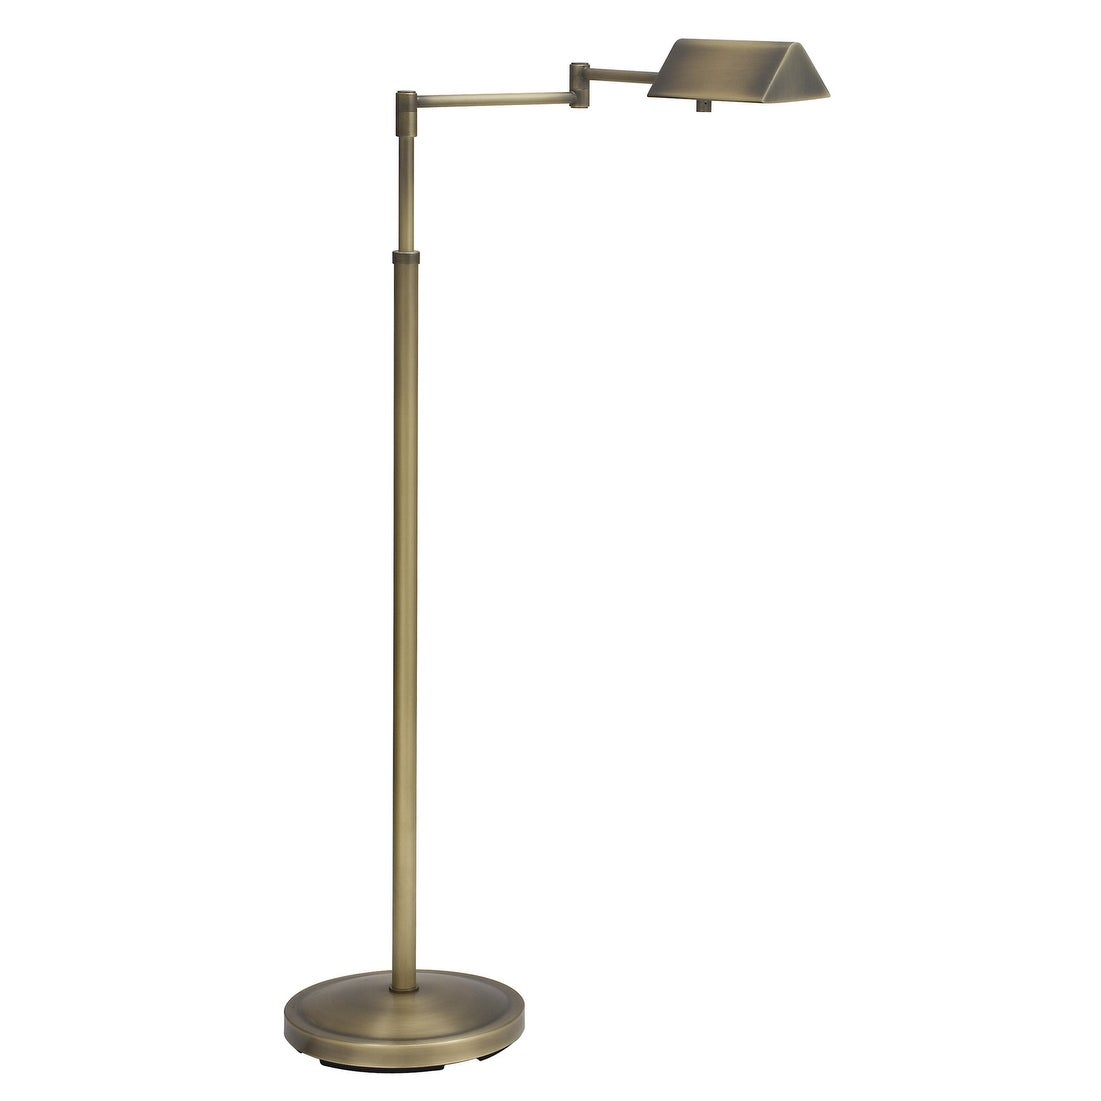 House Of Troy Pin400 Pinnacle 1 Light Adjustable Height Swing Arm Floor Lamp pertaining to dimensions 1101 X 1101